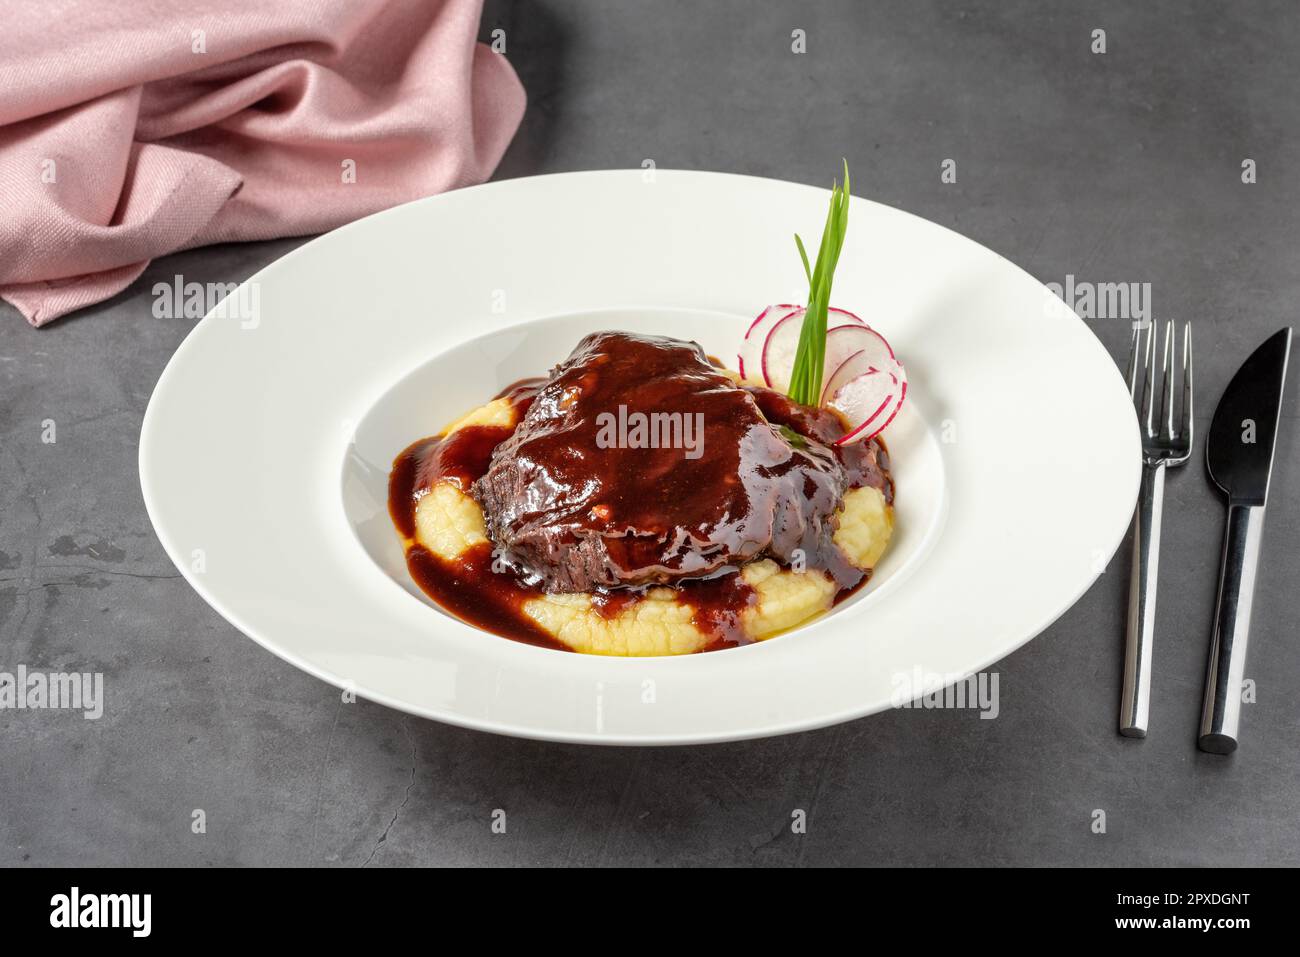 Veal cheek served in a fine dining restaurant Stock Photo